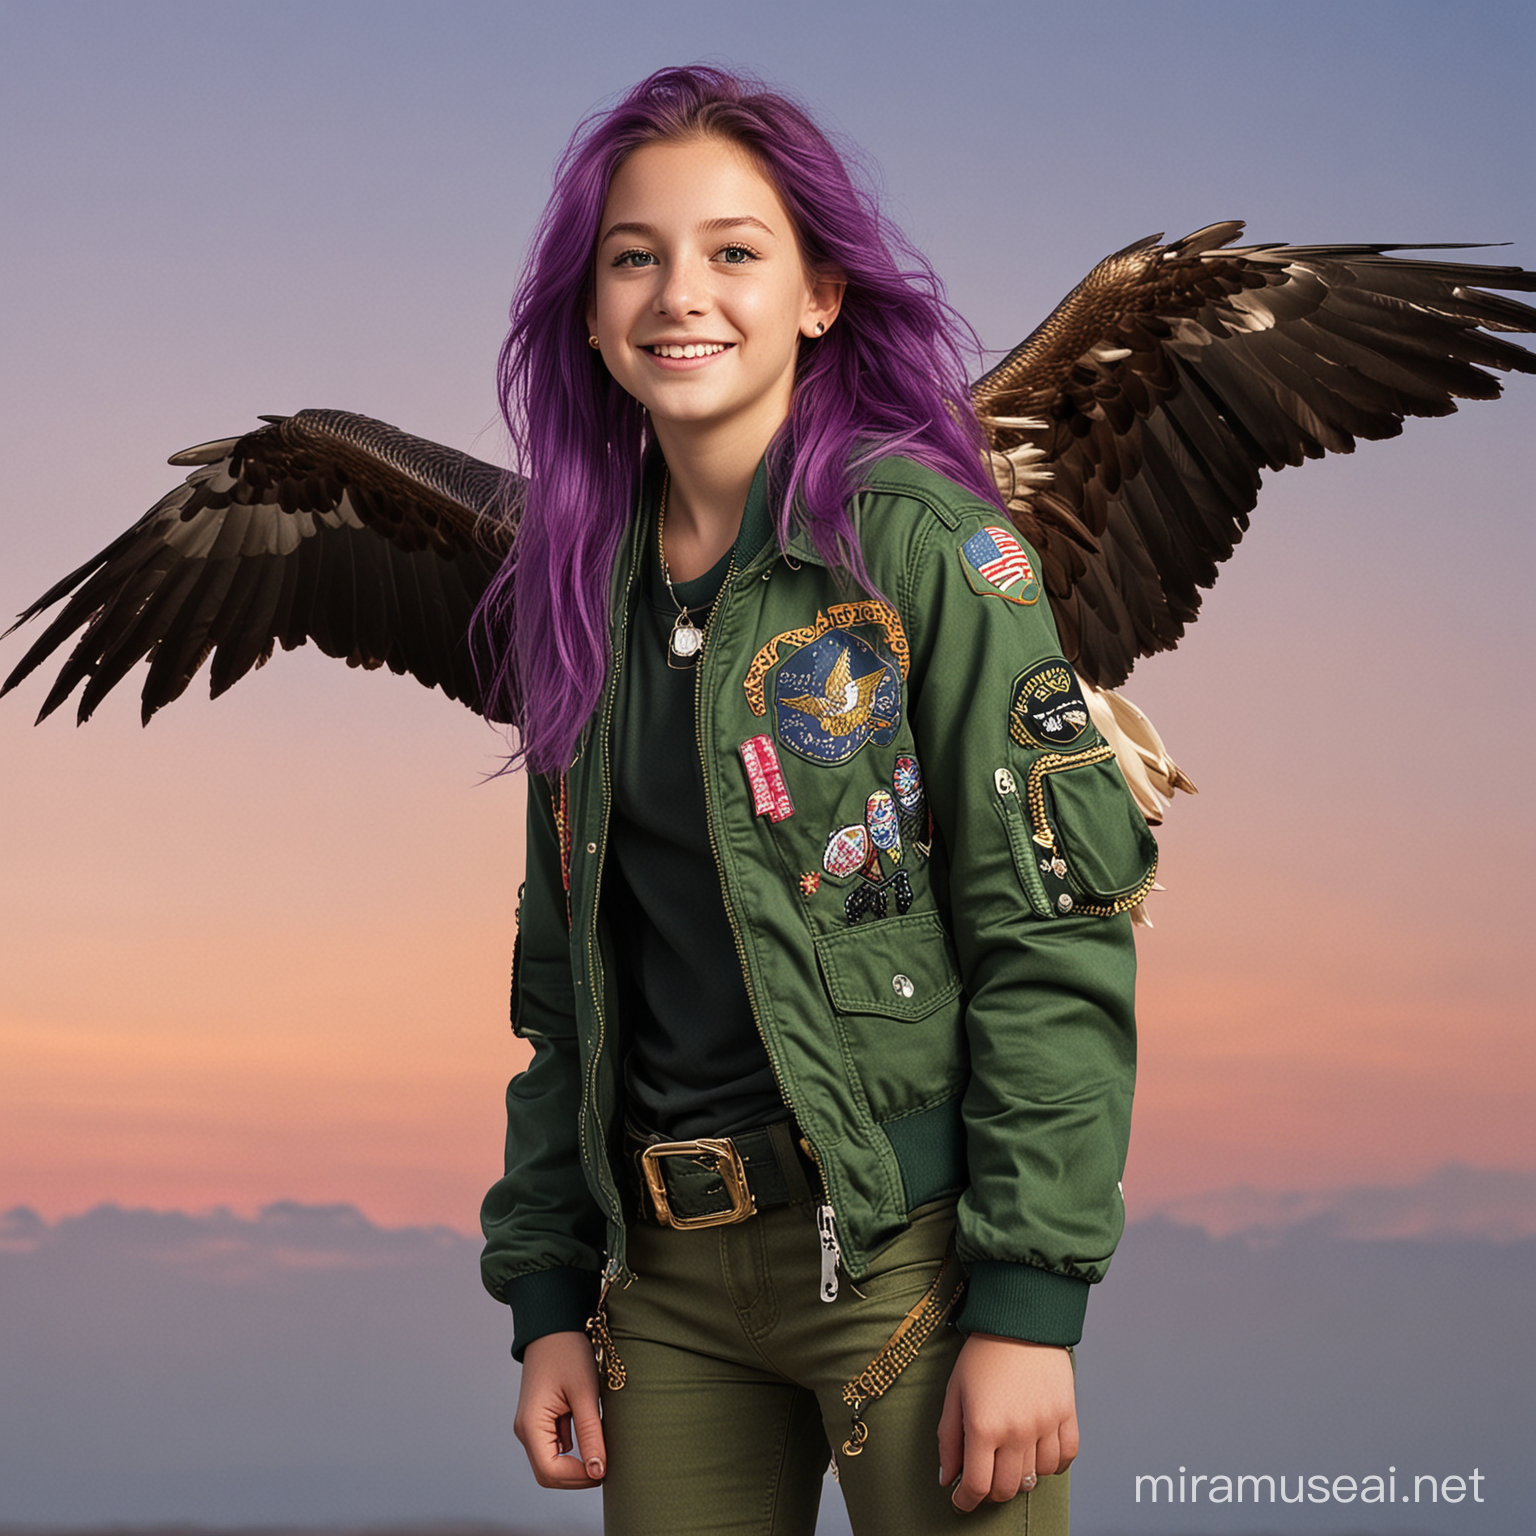 Surreal Fantasy Young Girl Soars on Wedgetail Eagle at Sunset